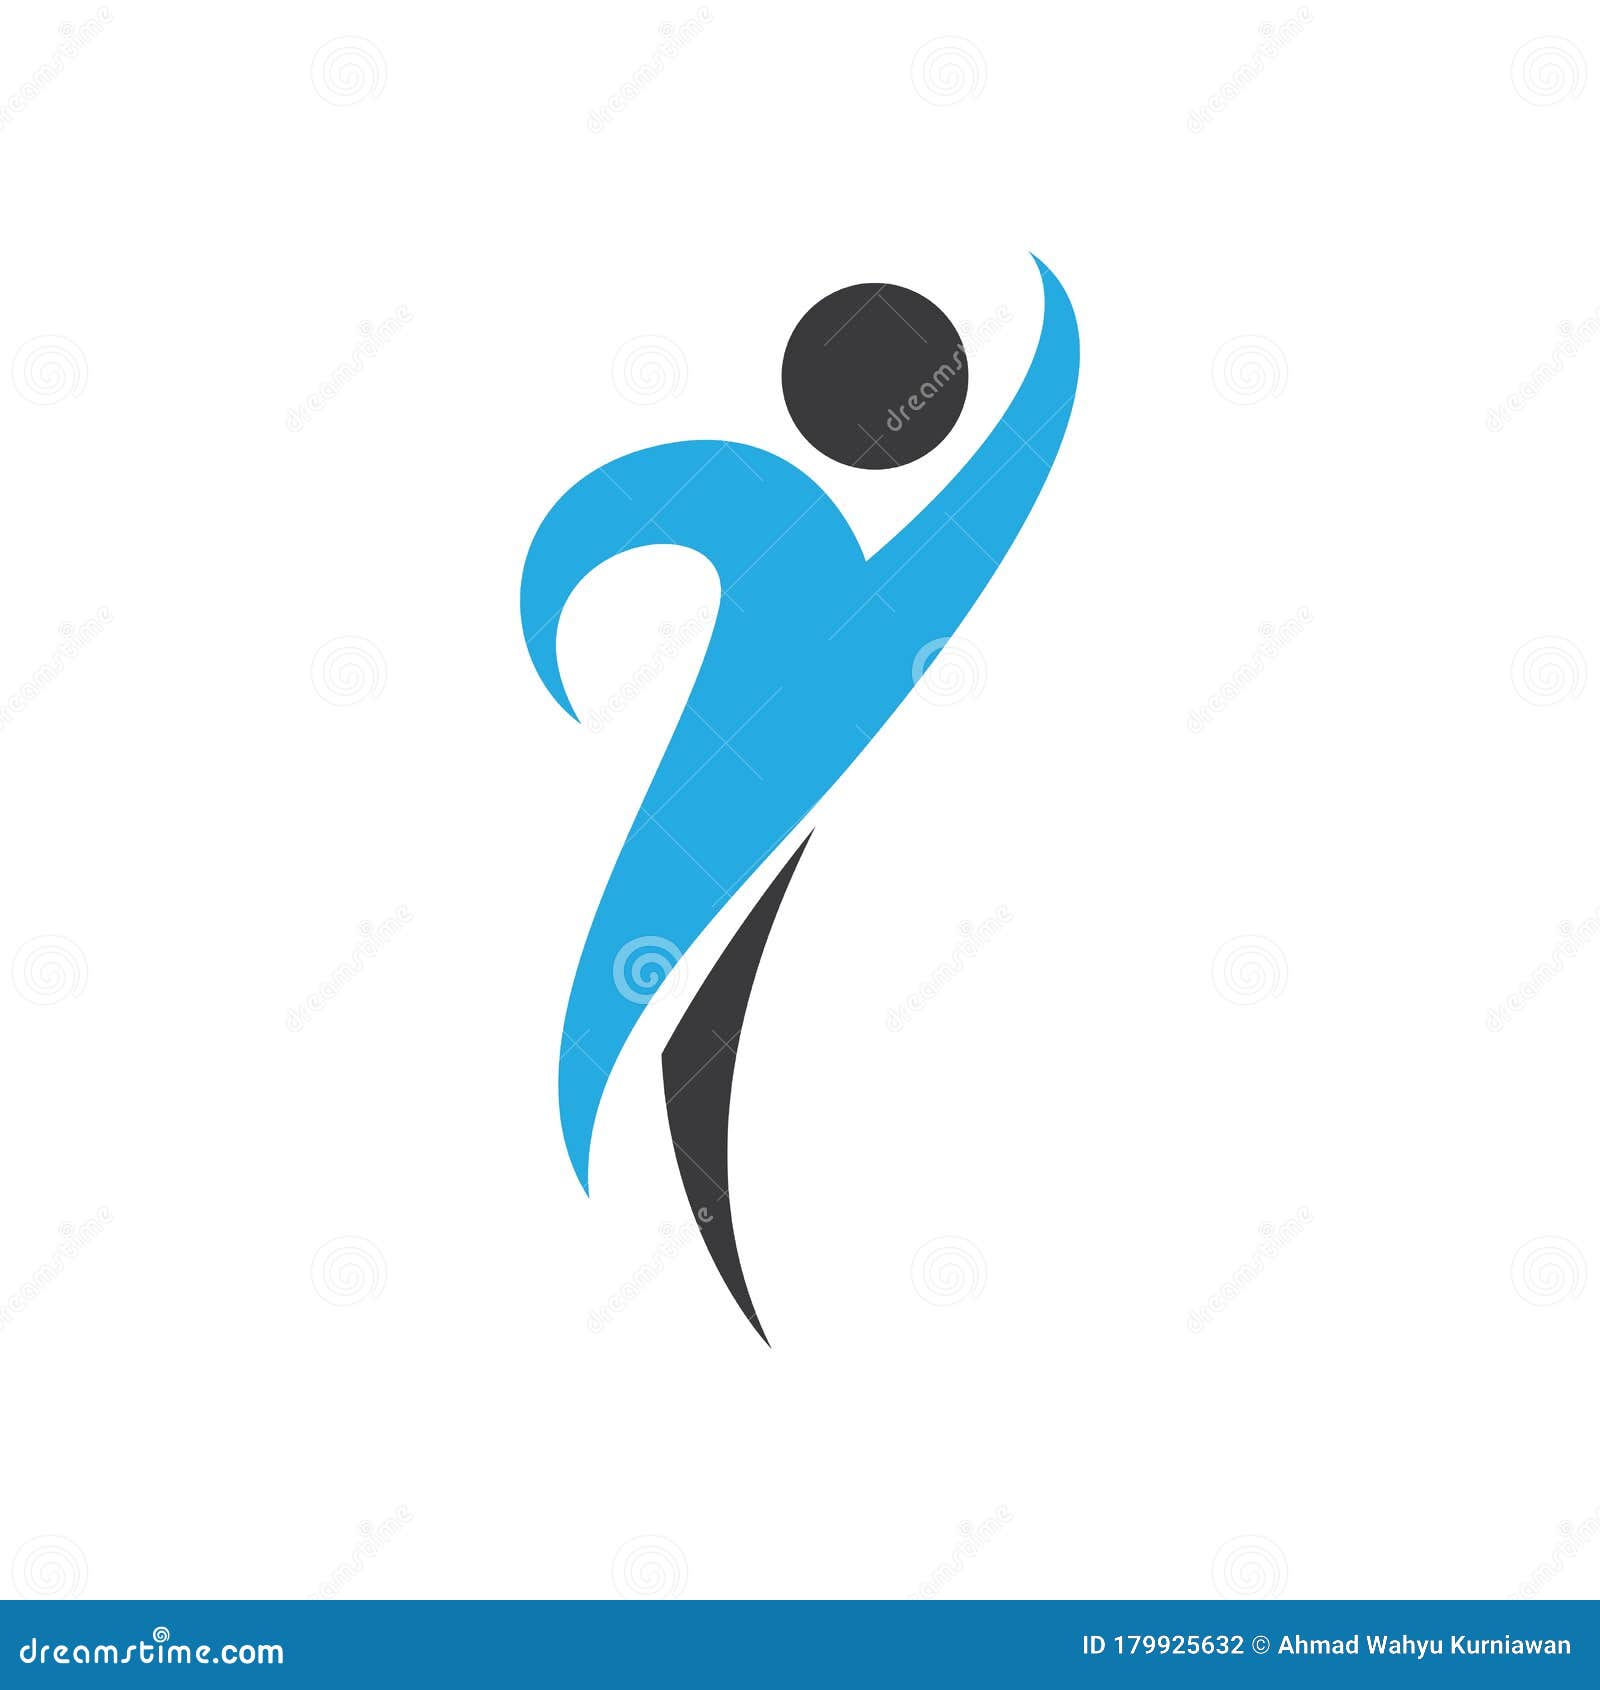 Healthy people logo stock illustration. Illustration of physiotherapy ...